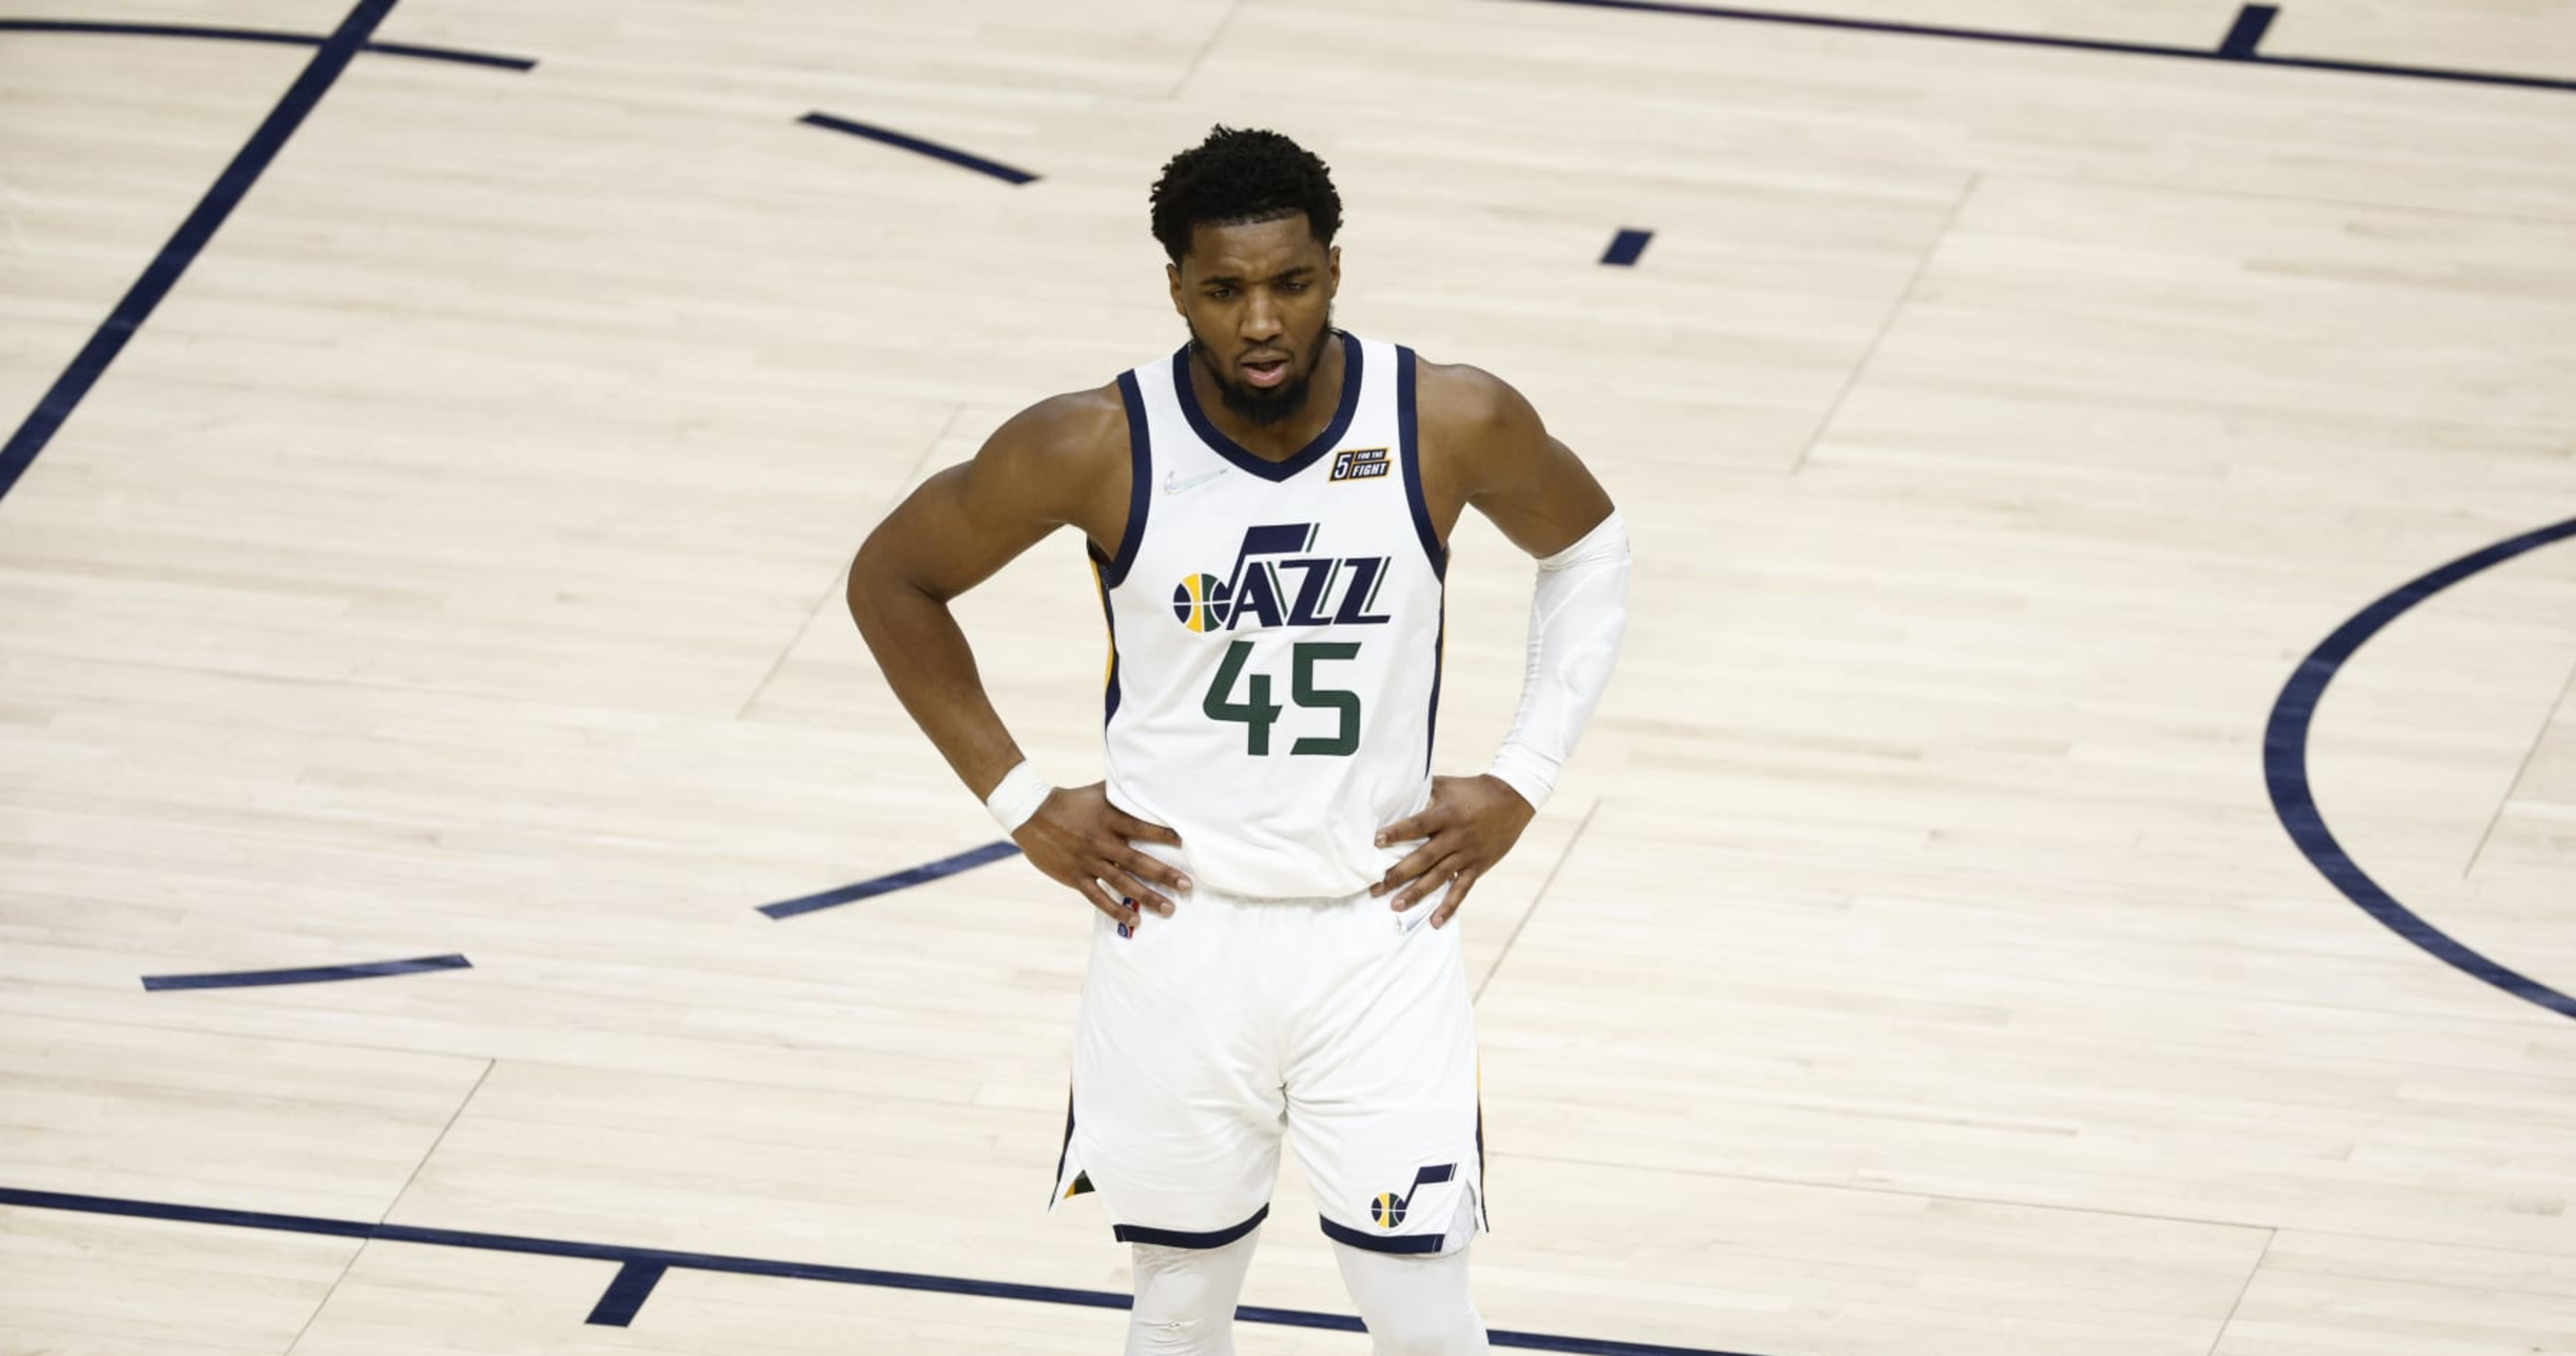 NBA Rumors: Jazz Traded Donovan Mitchell to Cavs Instead of Knicks 'as Payback'